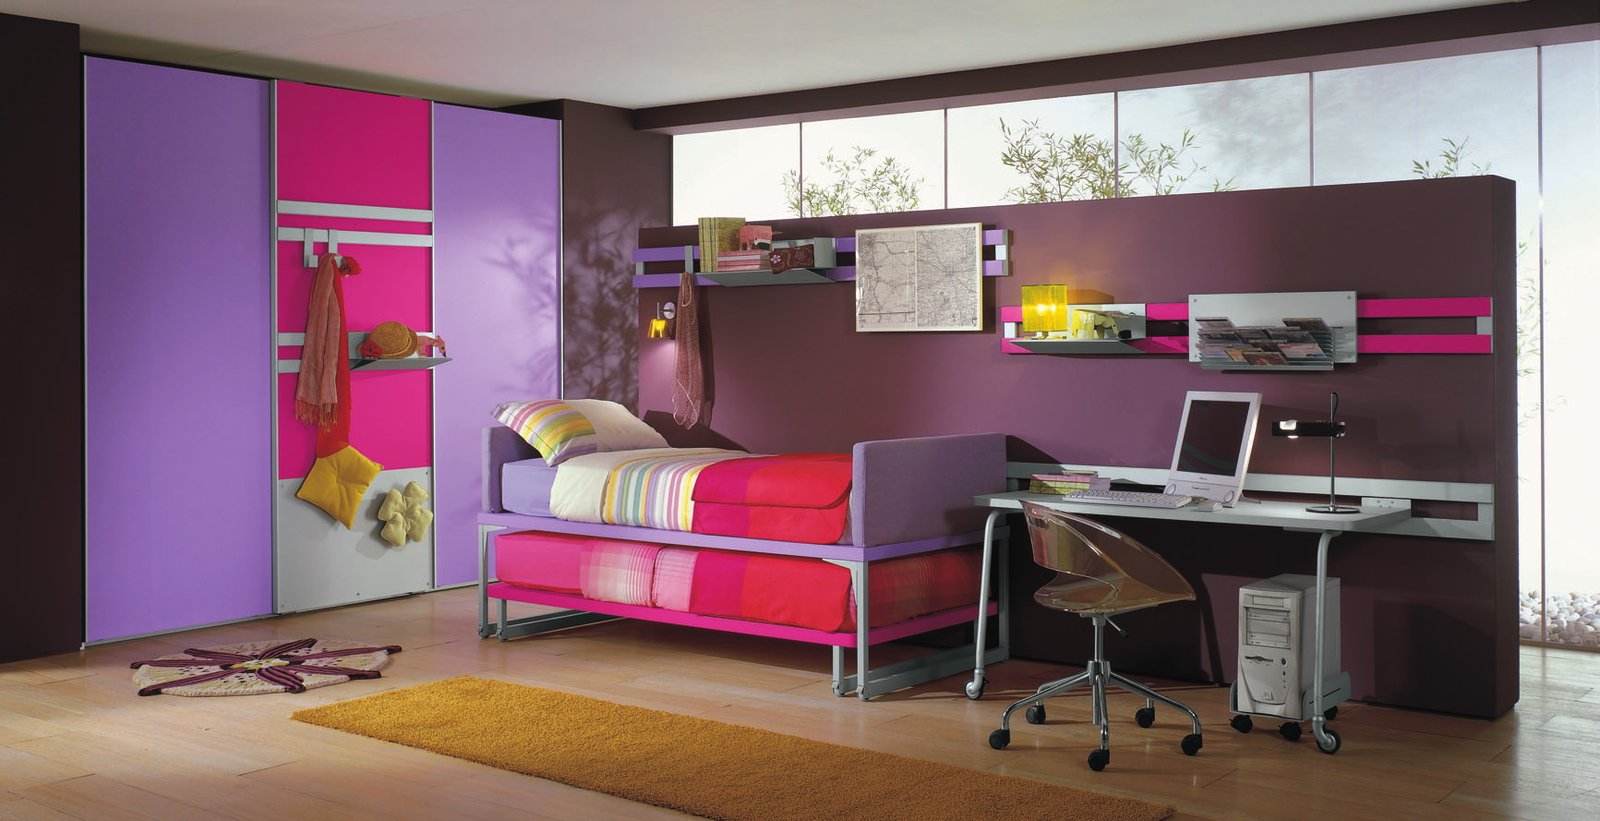 red-and-purple-teen-bedroom-decor red and purple teen bedroom decor